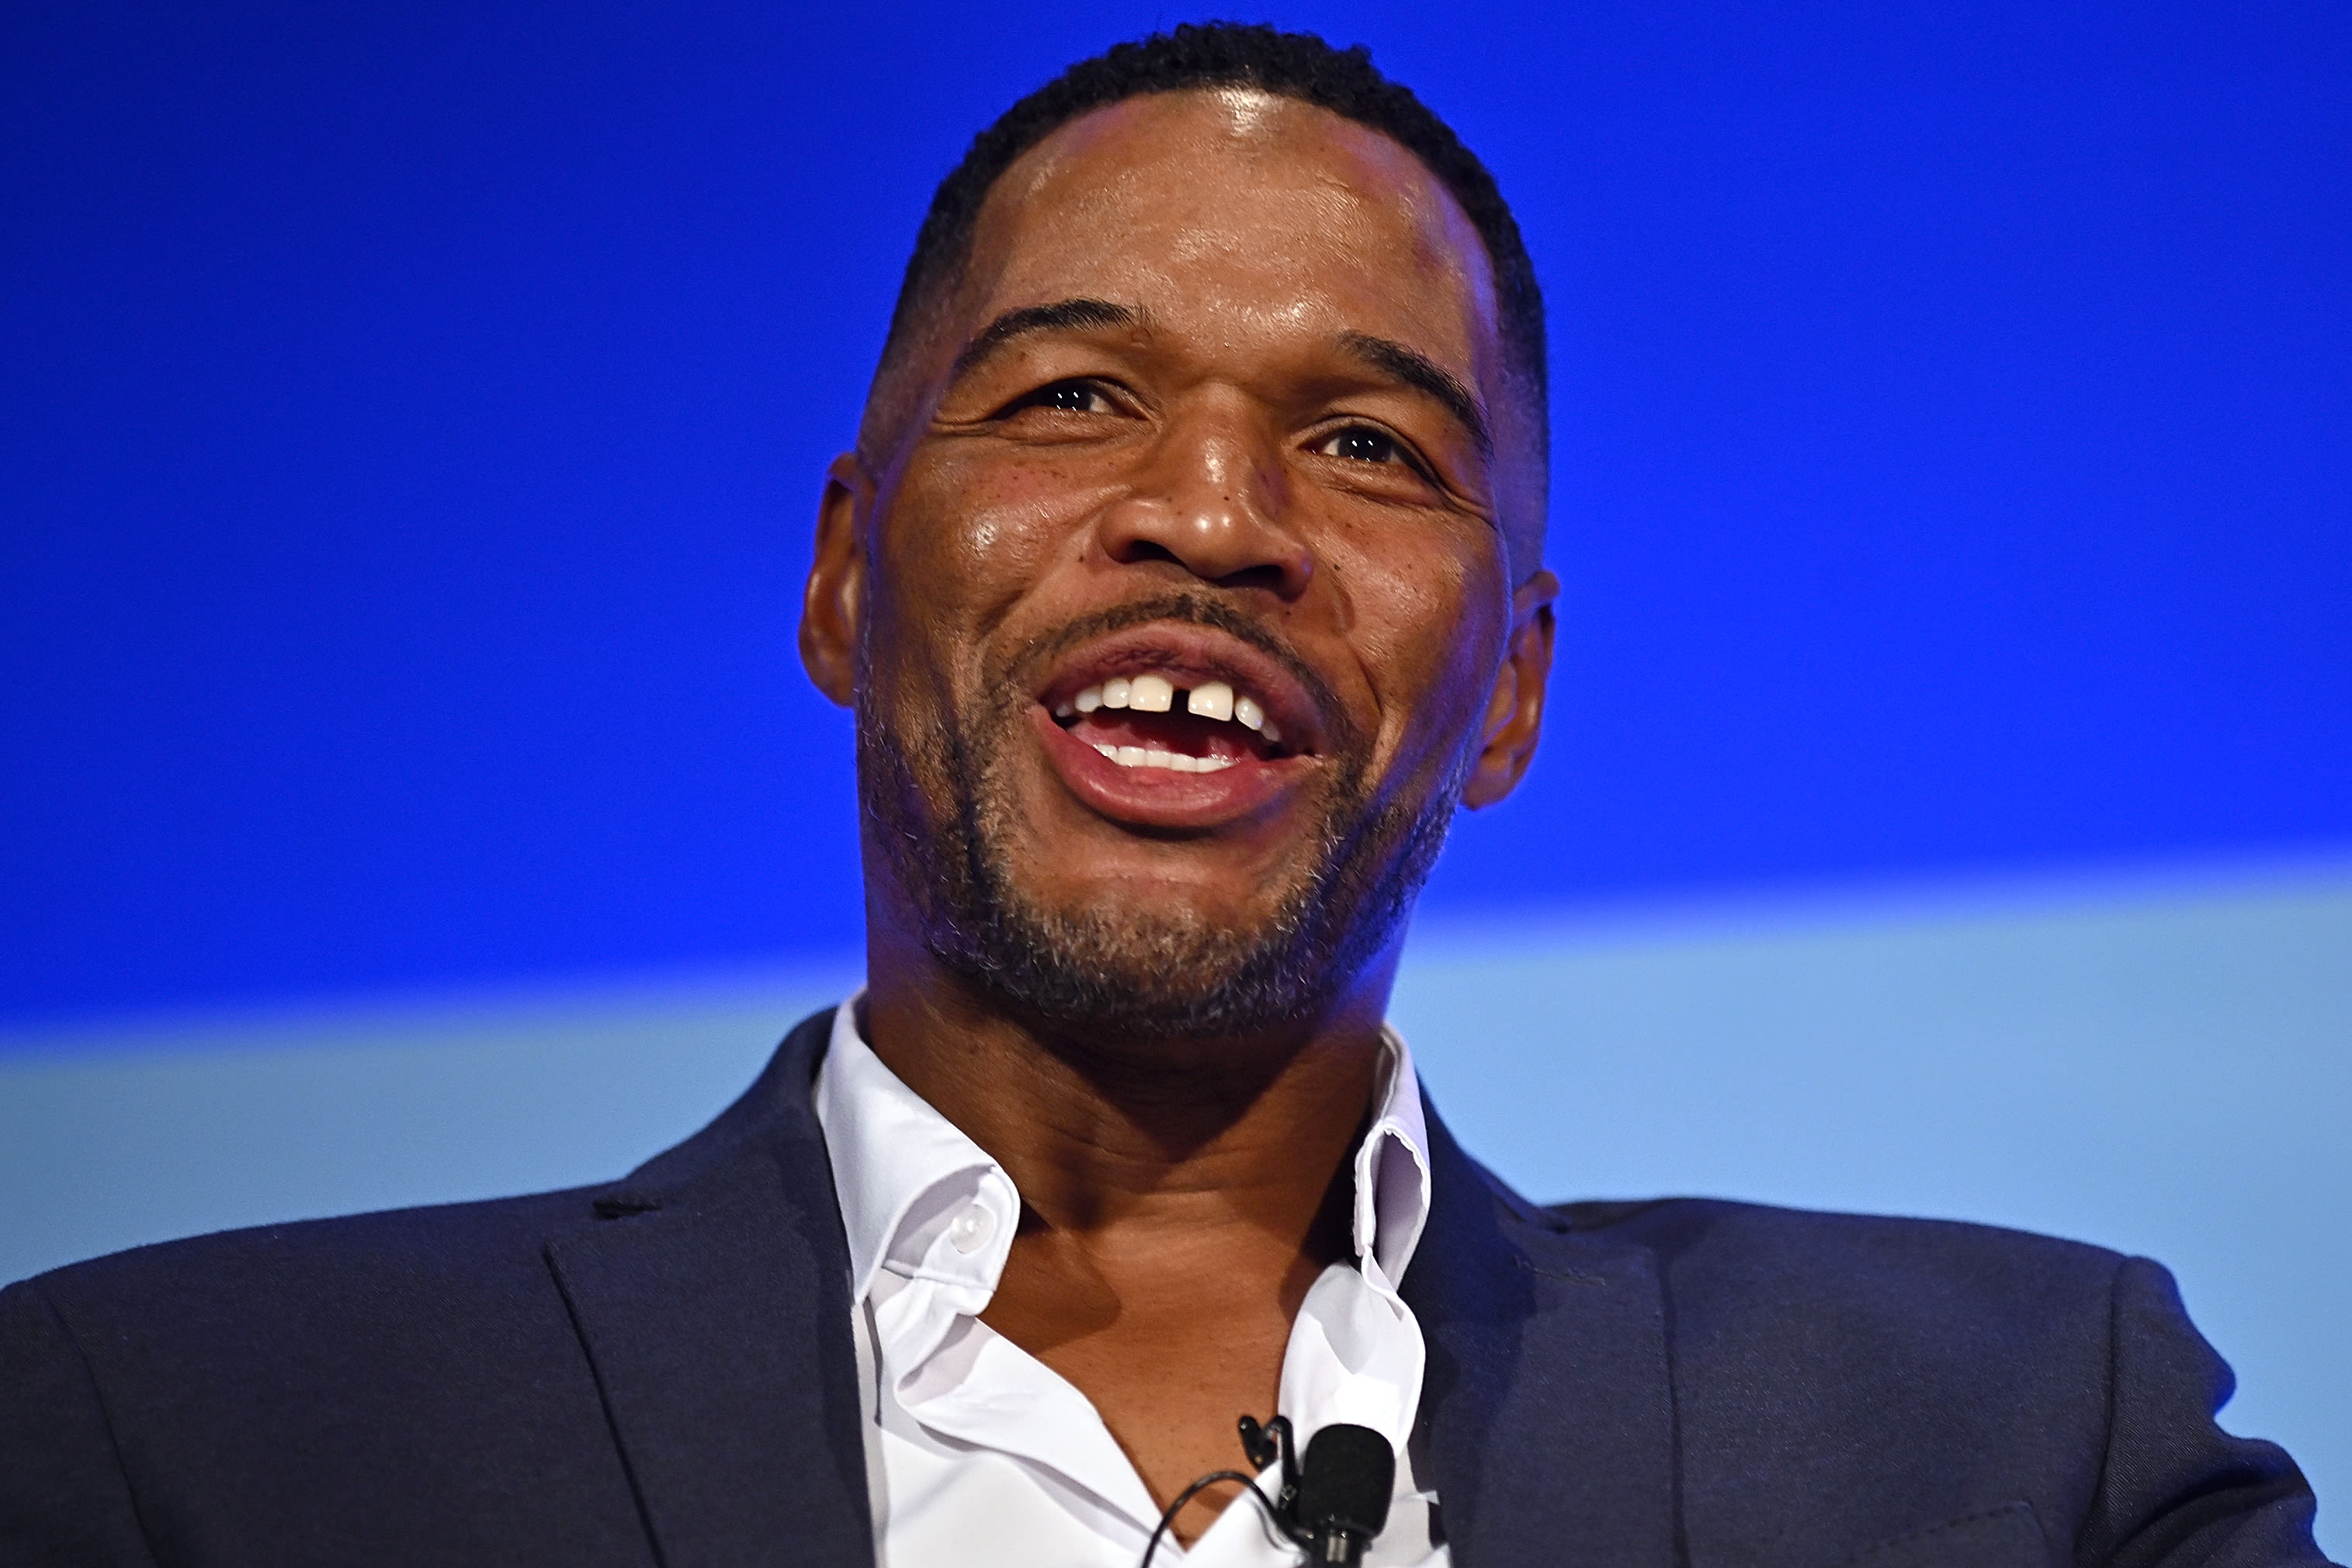 Why Michael Strahan is missing from 'Good Morning America' again